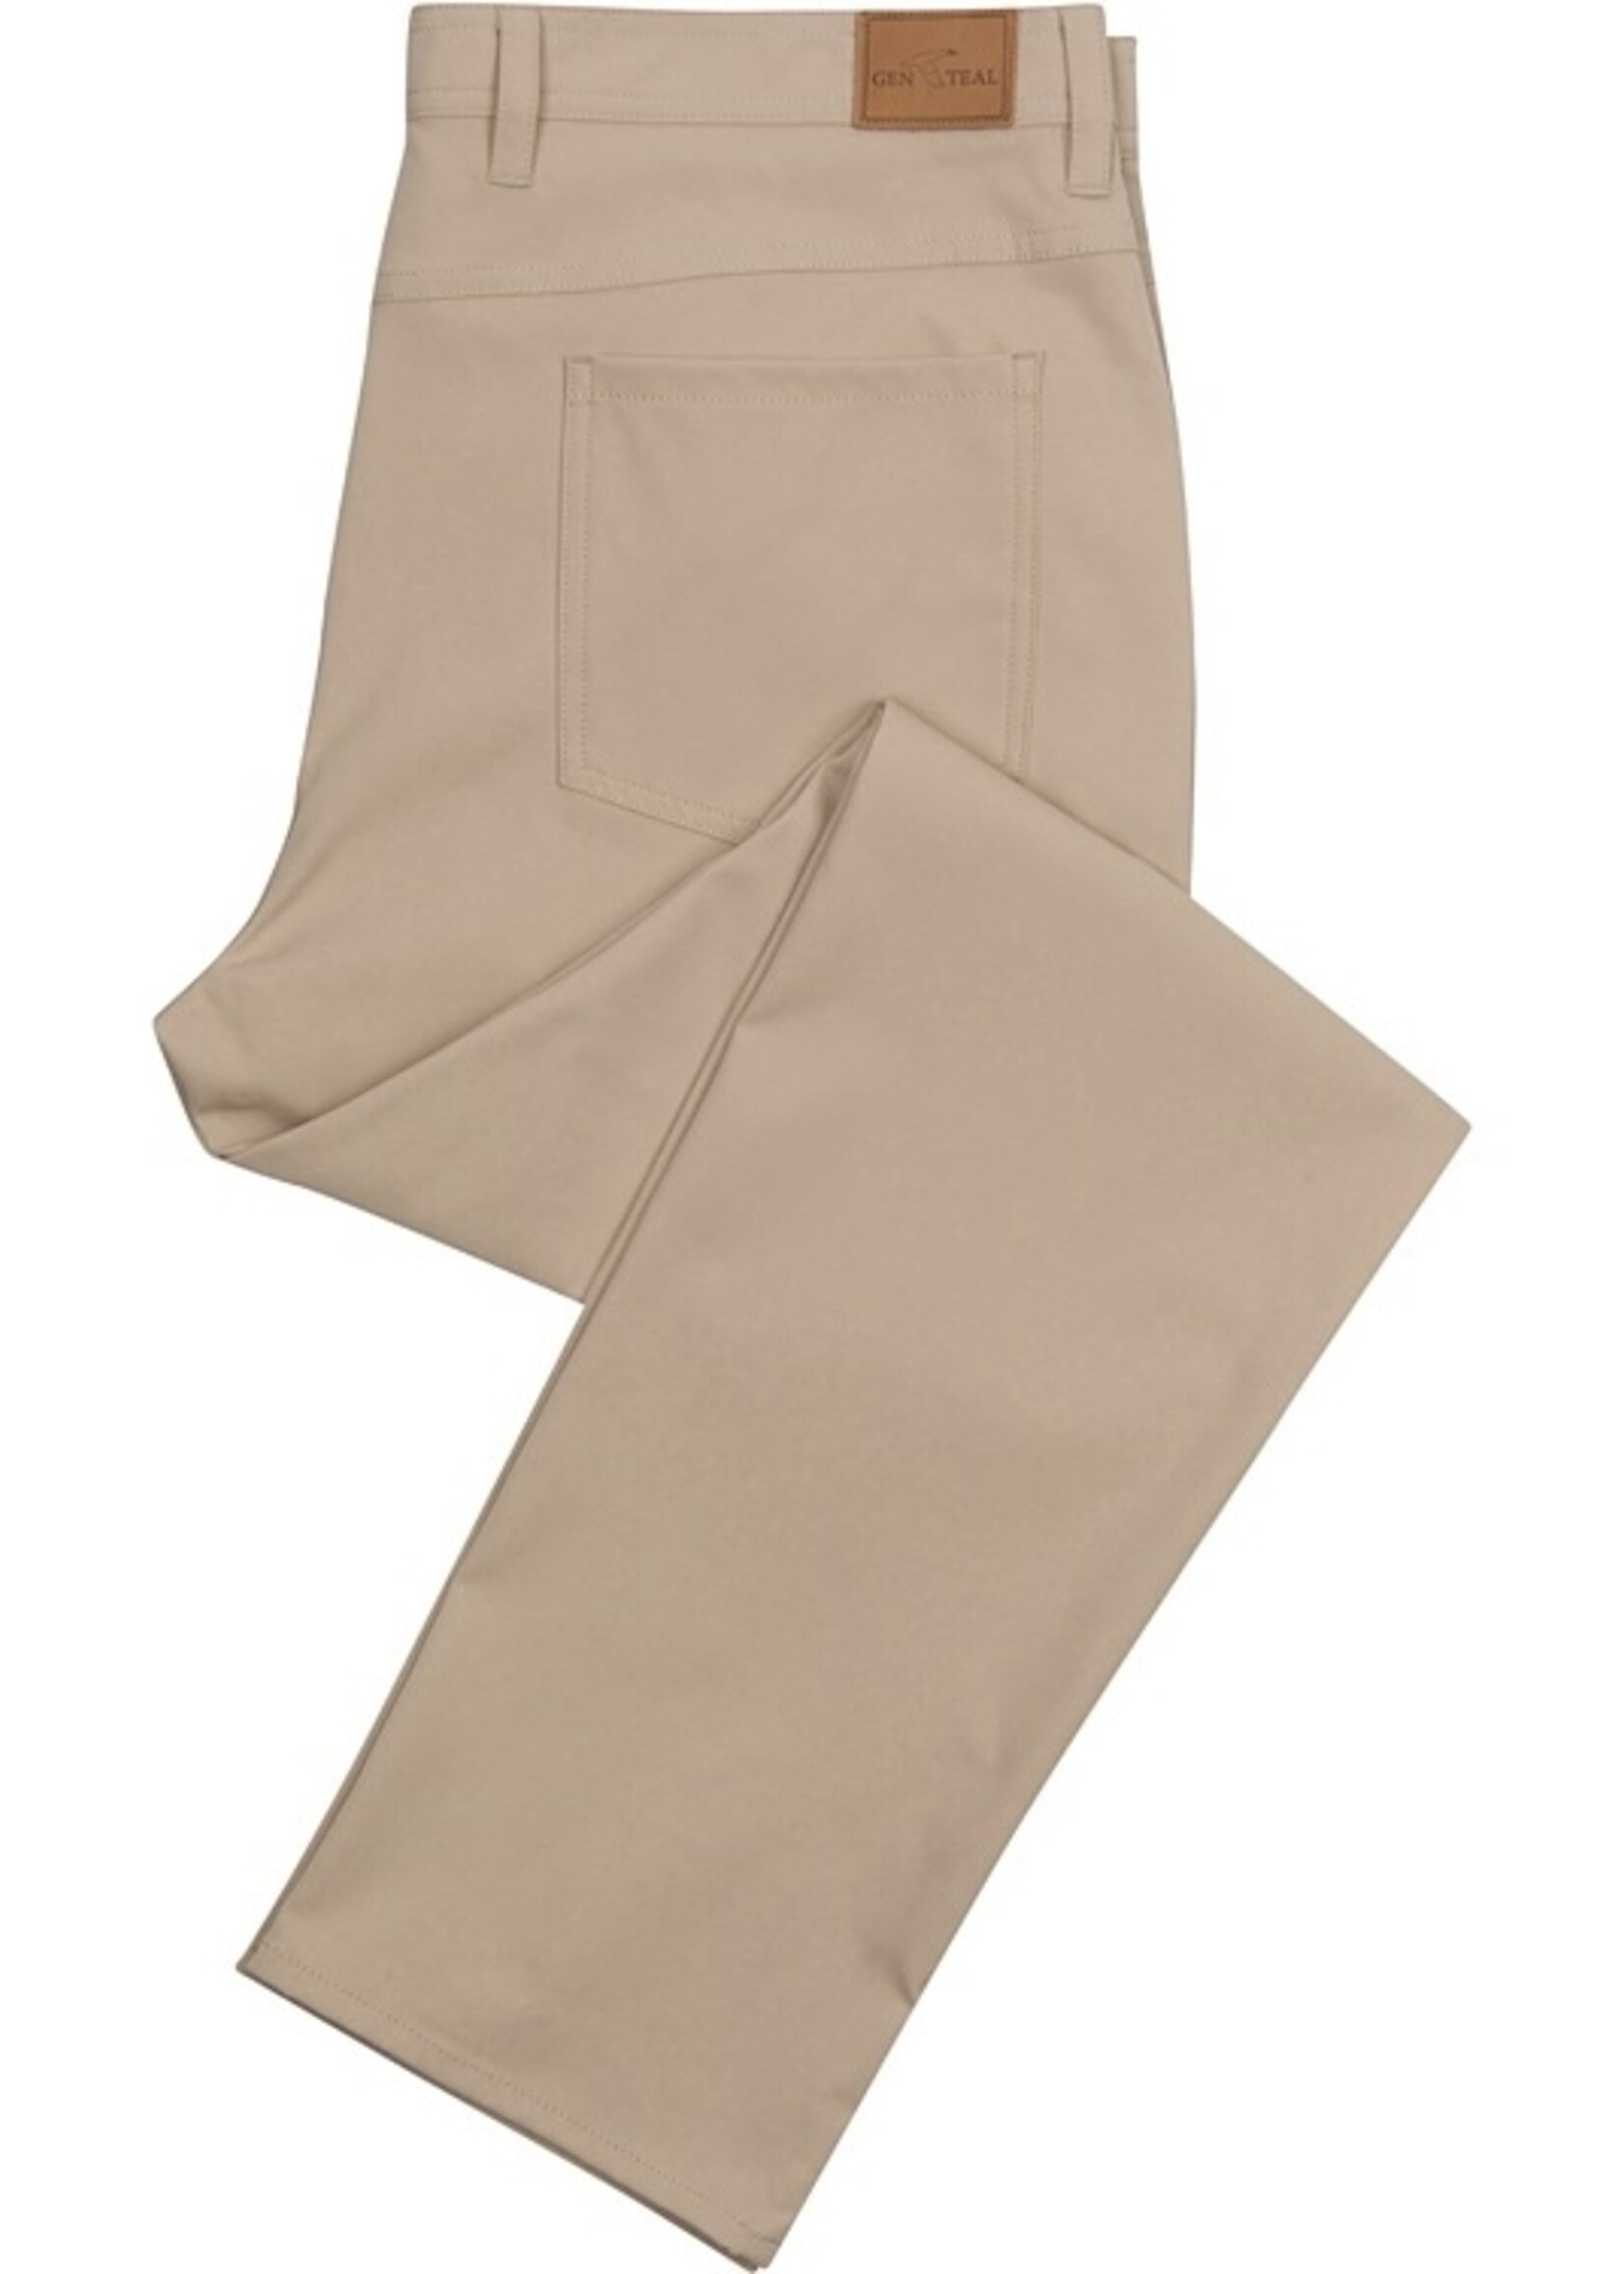 GenTeal Apparel Clubhouse Stretch Pant